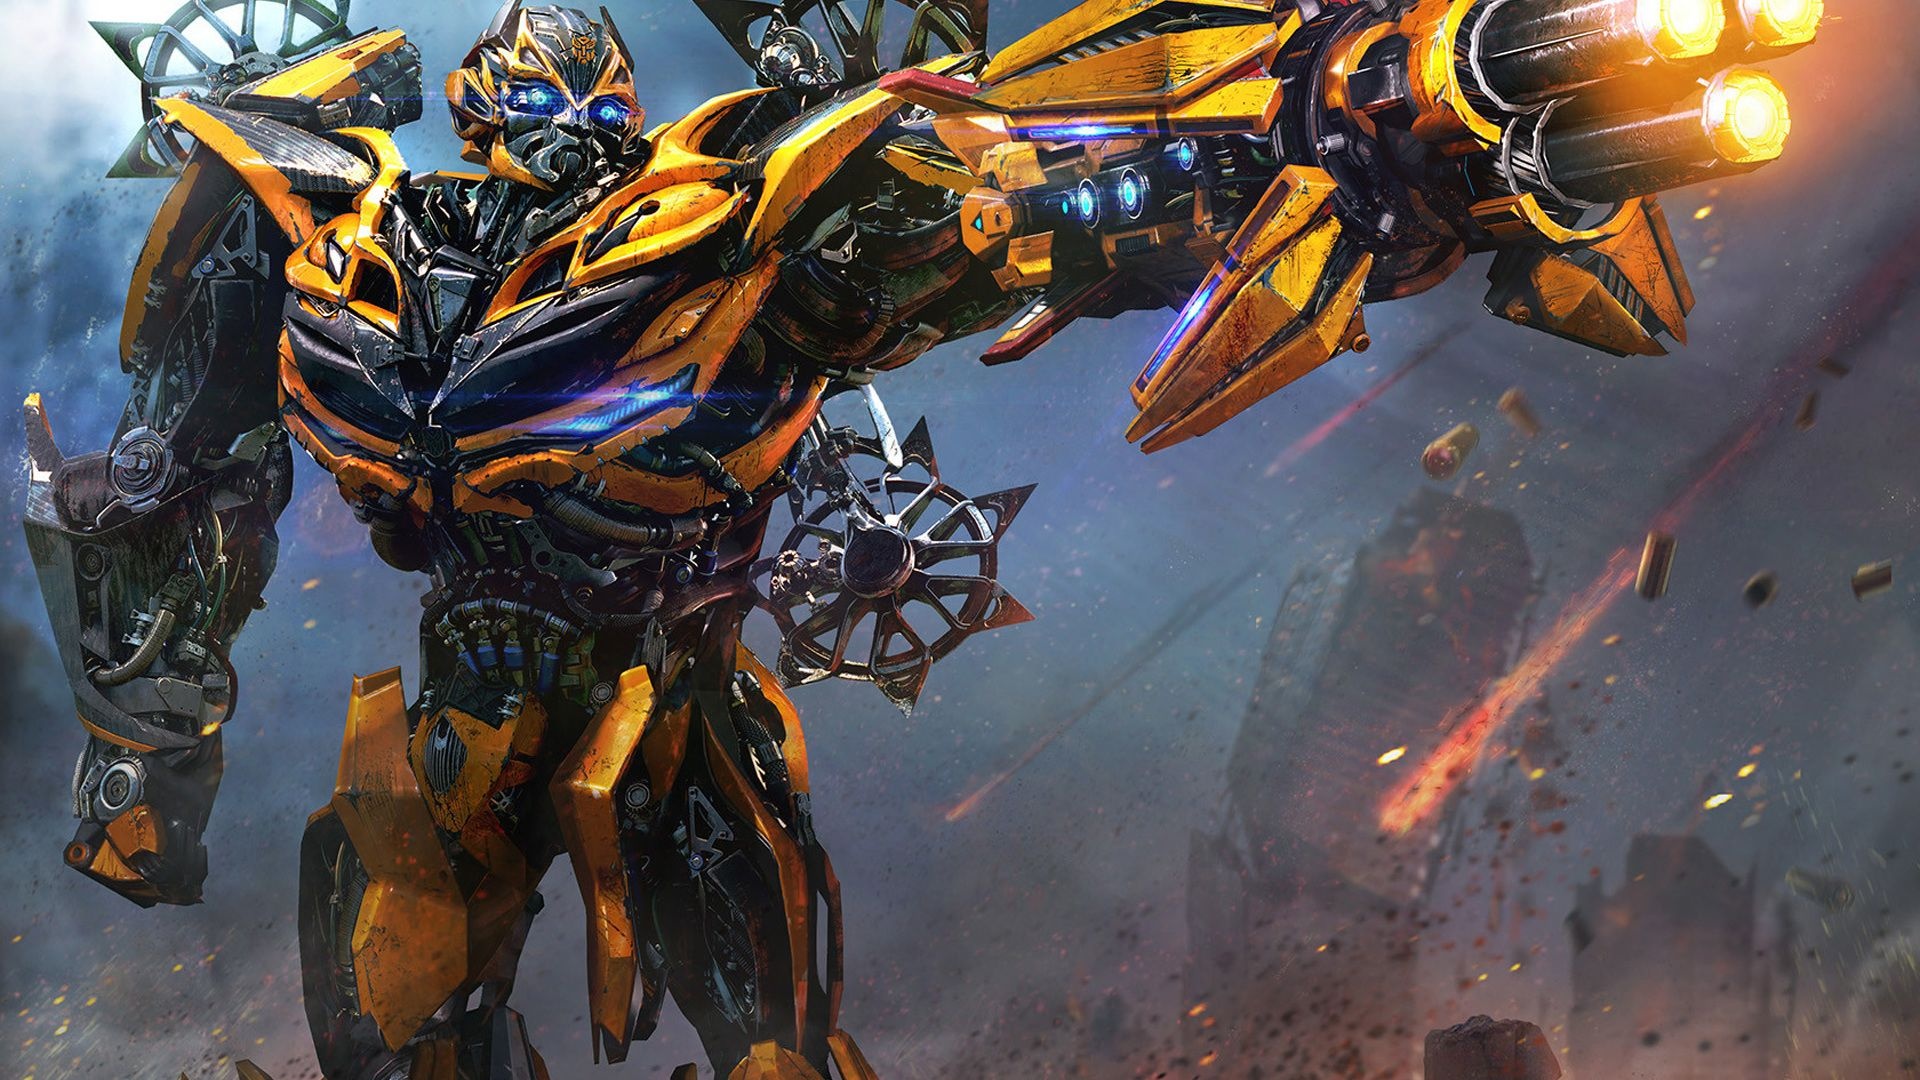 Bumblebee wallpapers, Autobot hero, High-definition images, Action-packed adventure, 1920x1080 Full HD Desktop